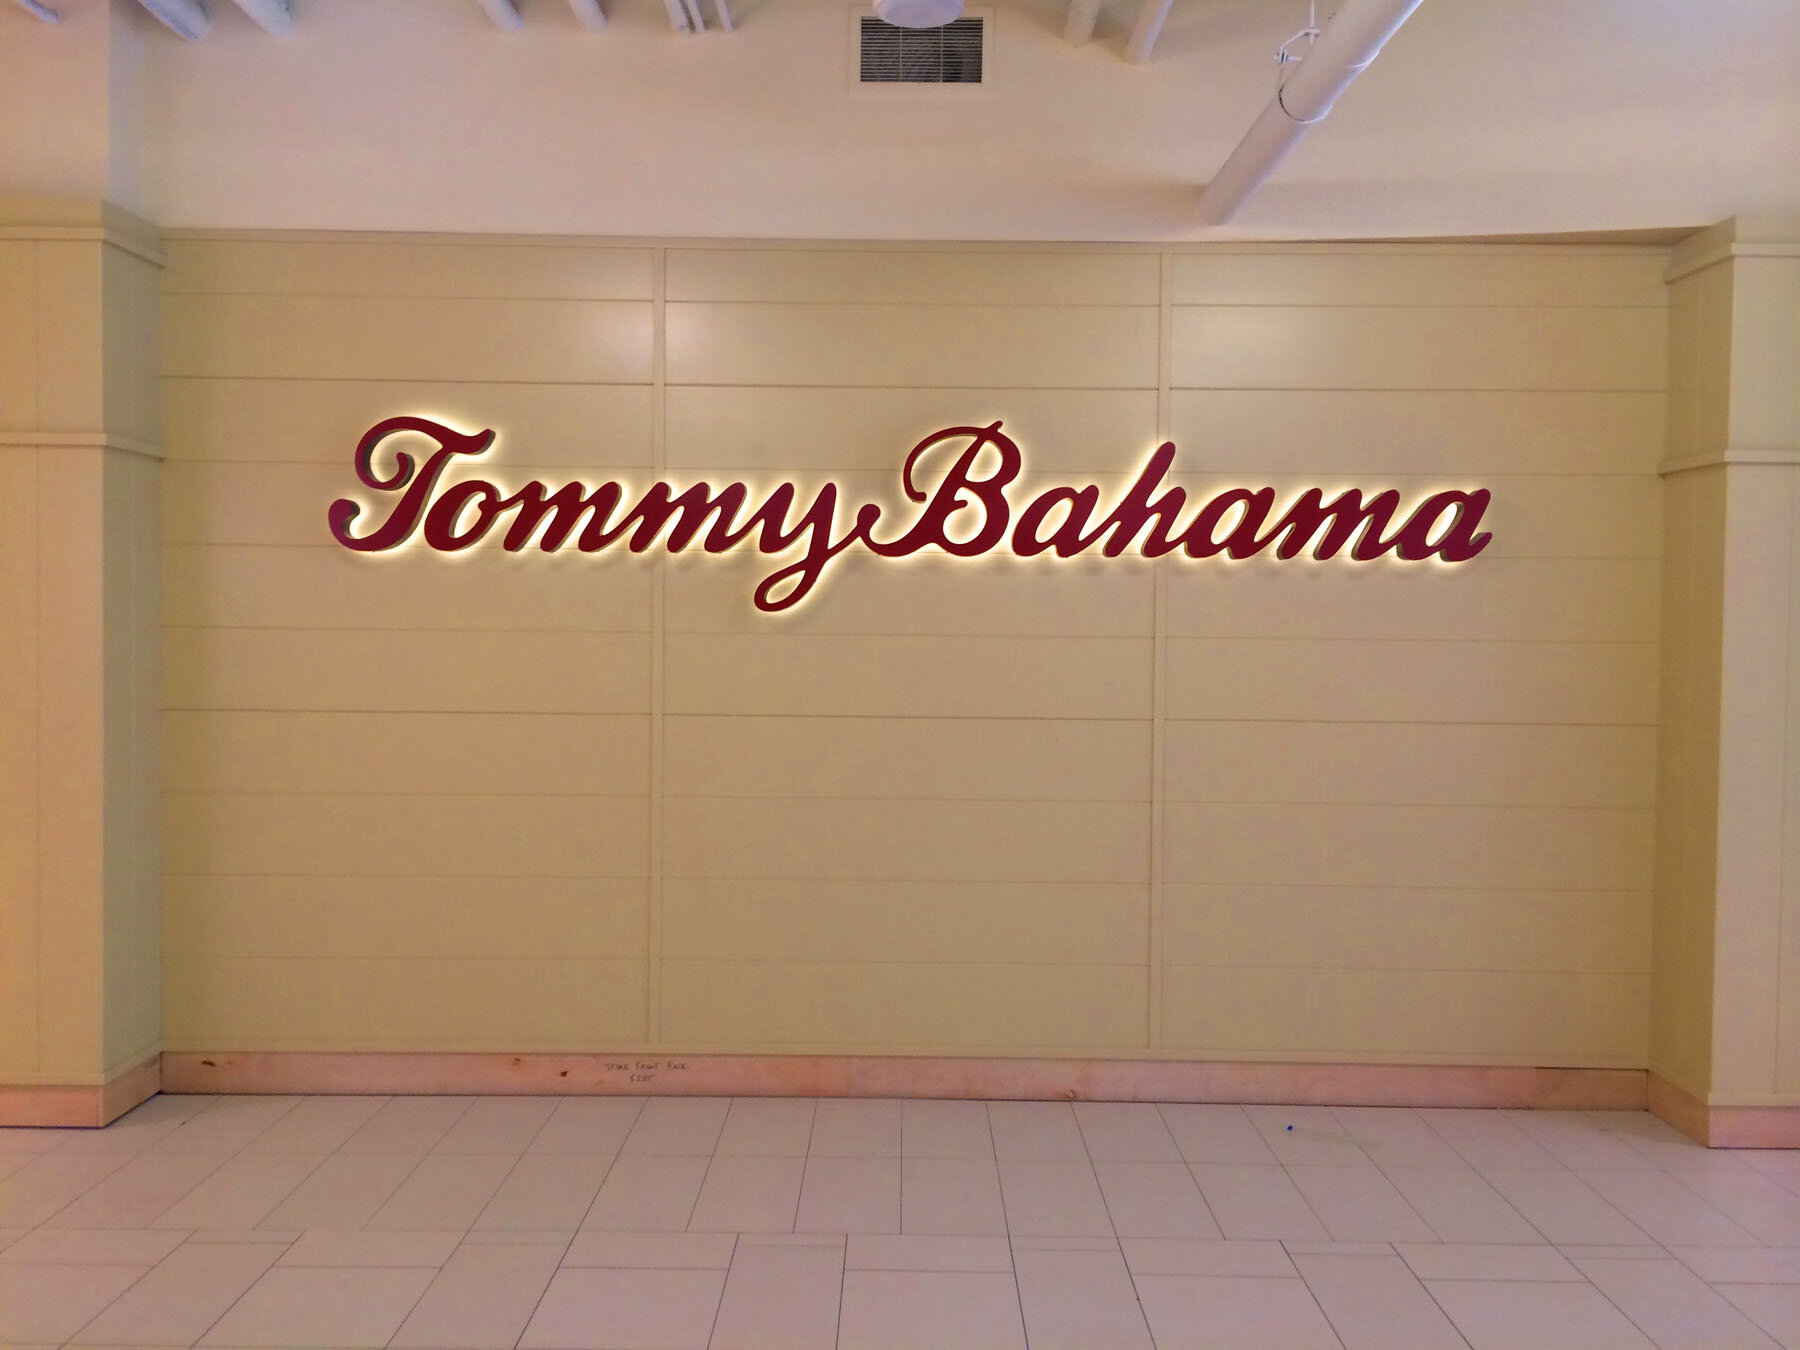 Tommy Bahama Outlet Channel Letters